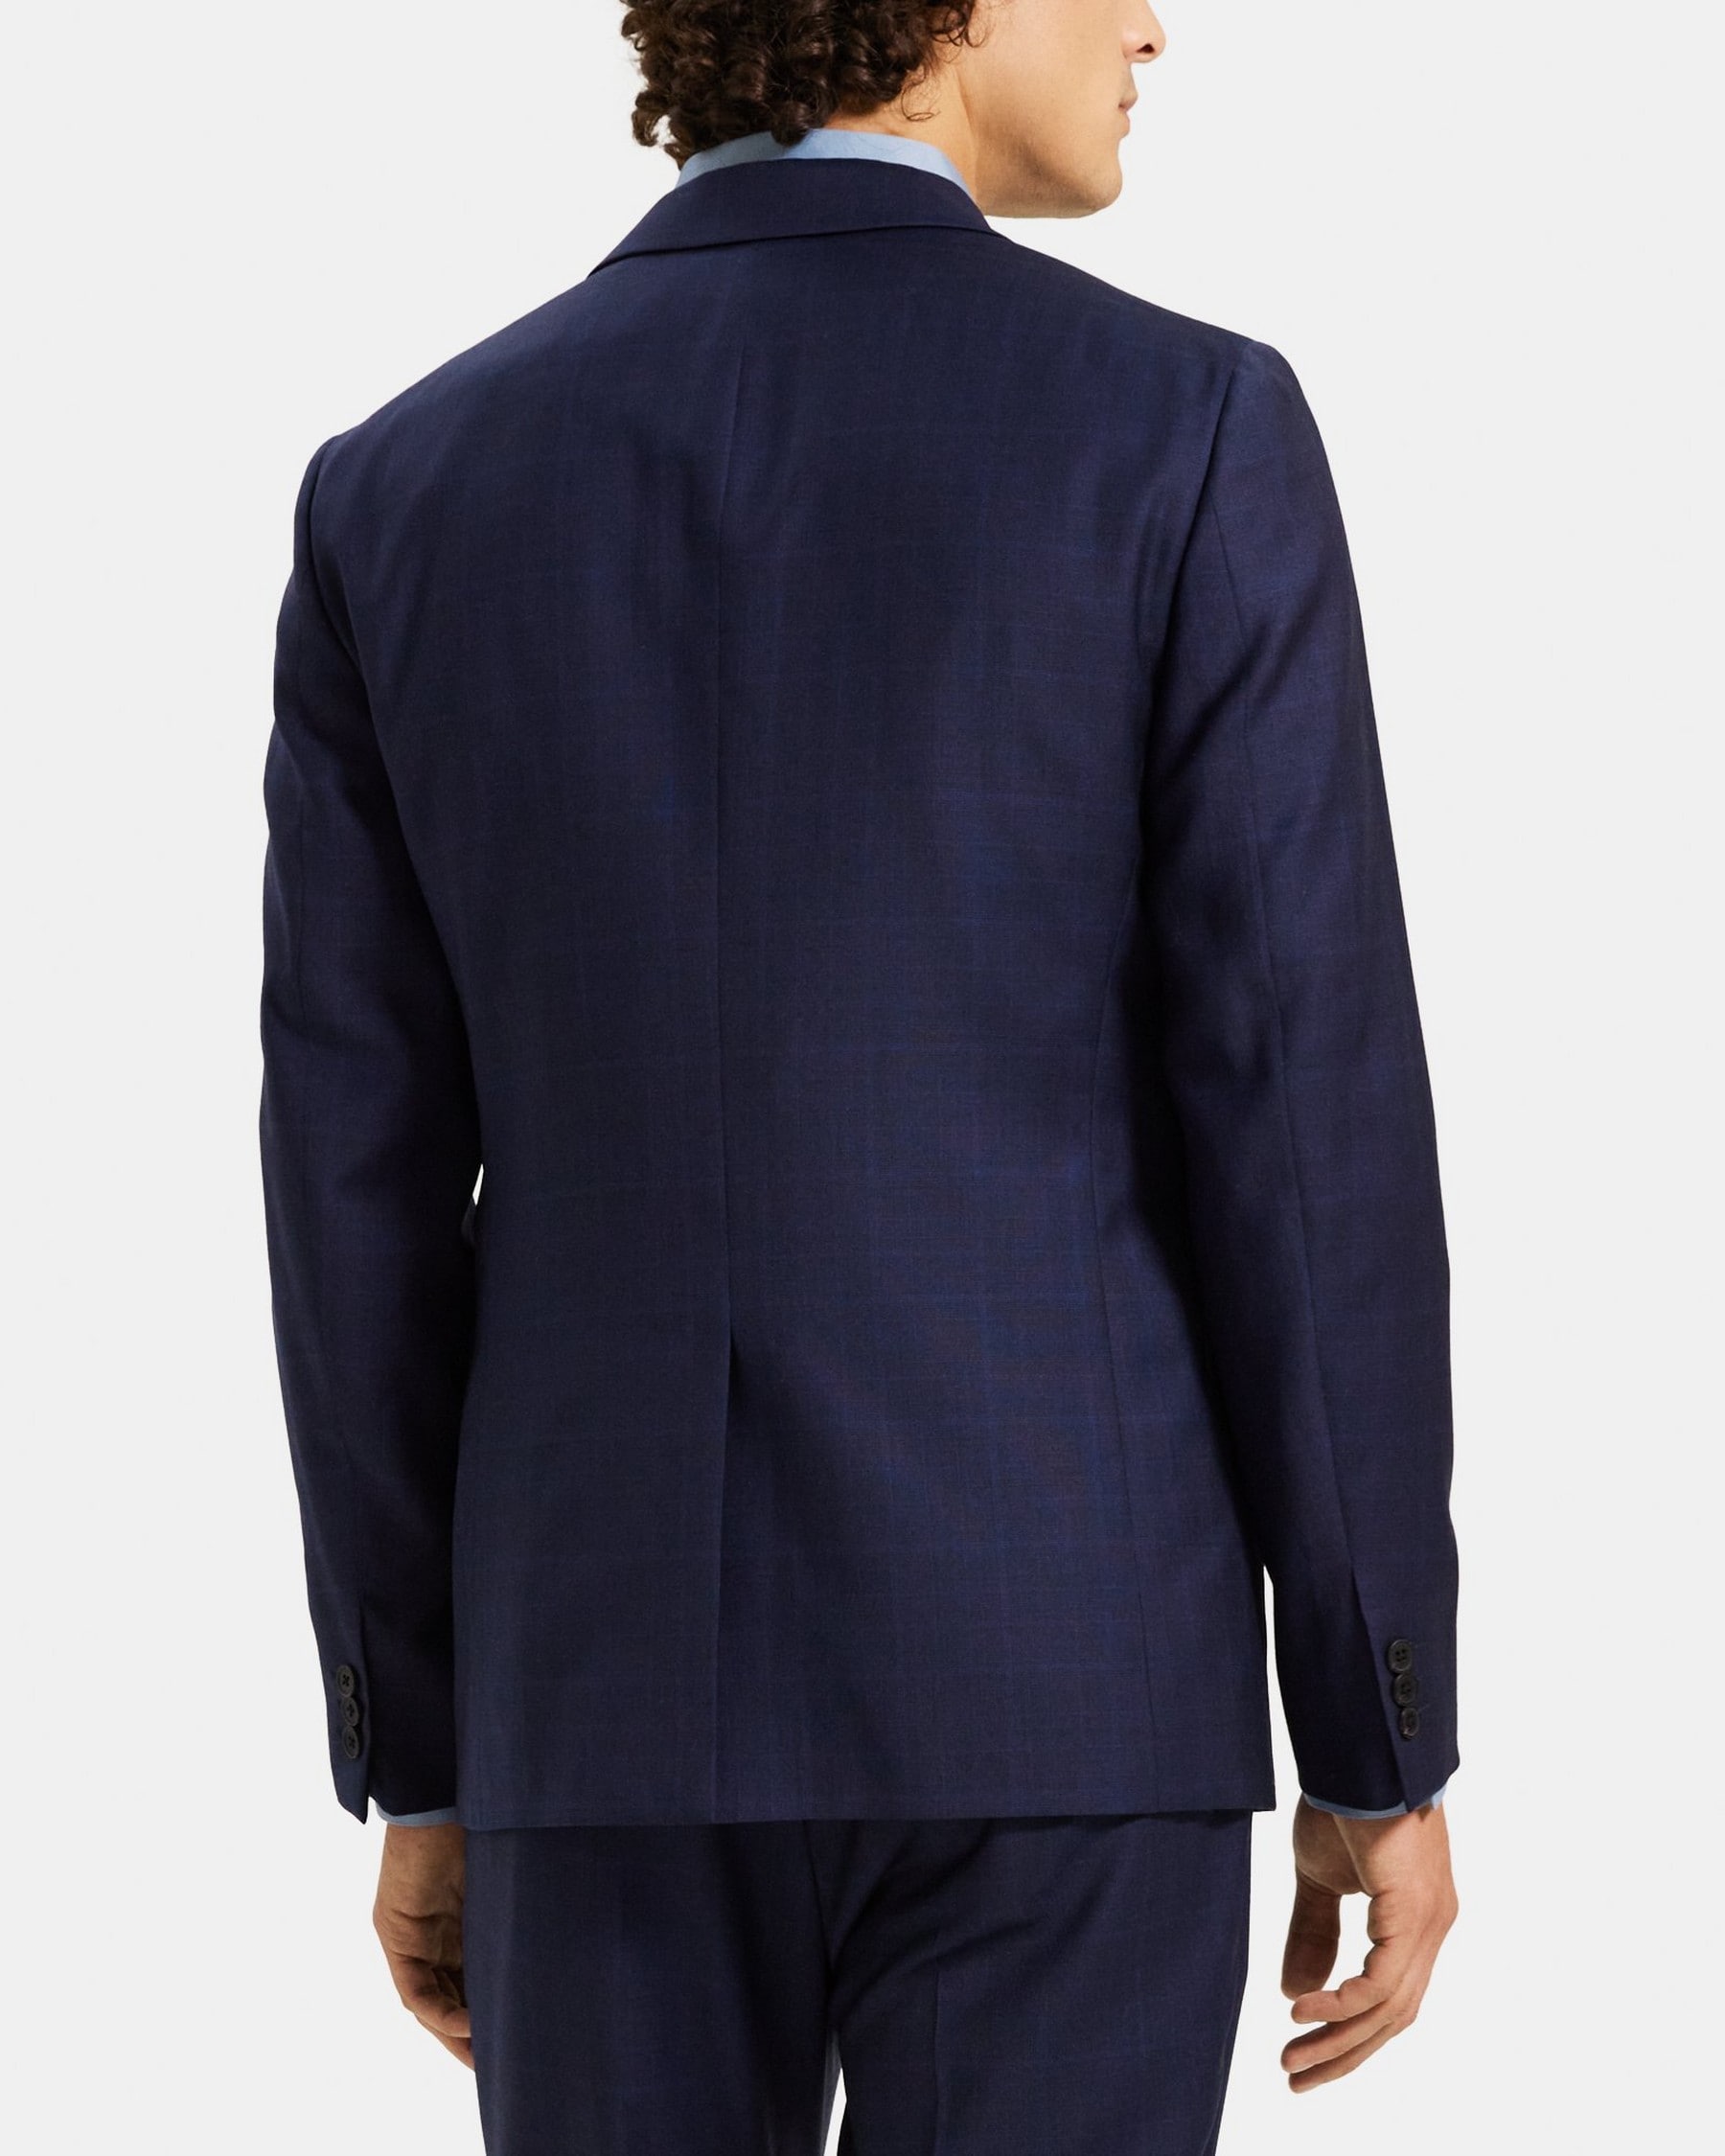 Unstructured Suit Jacket in Plaid Wool